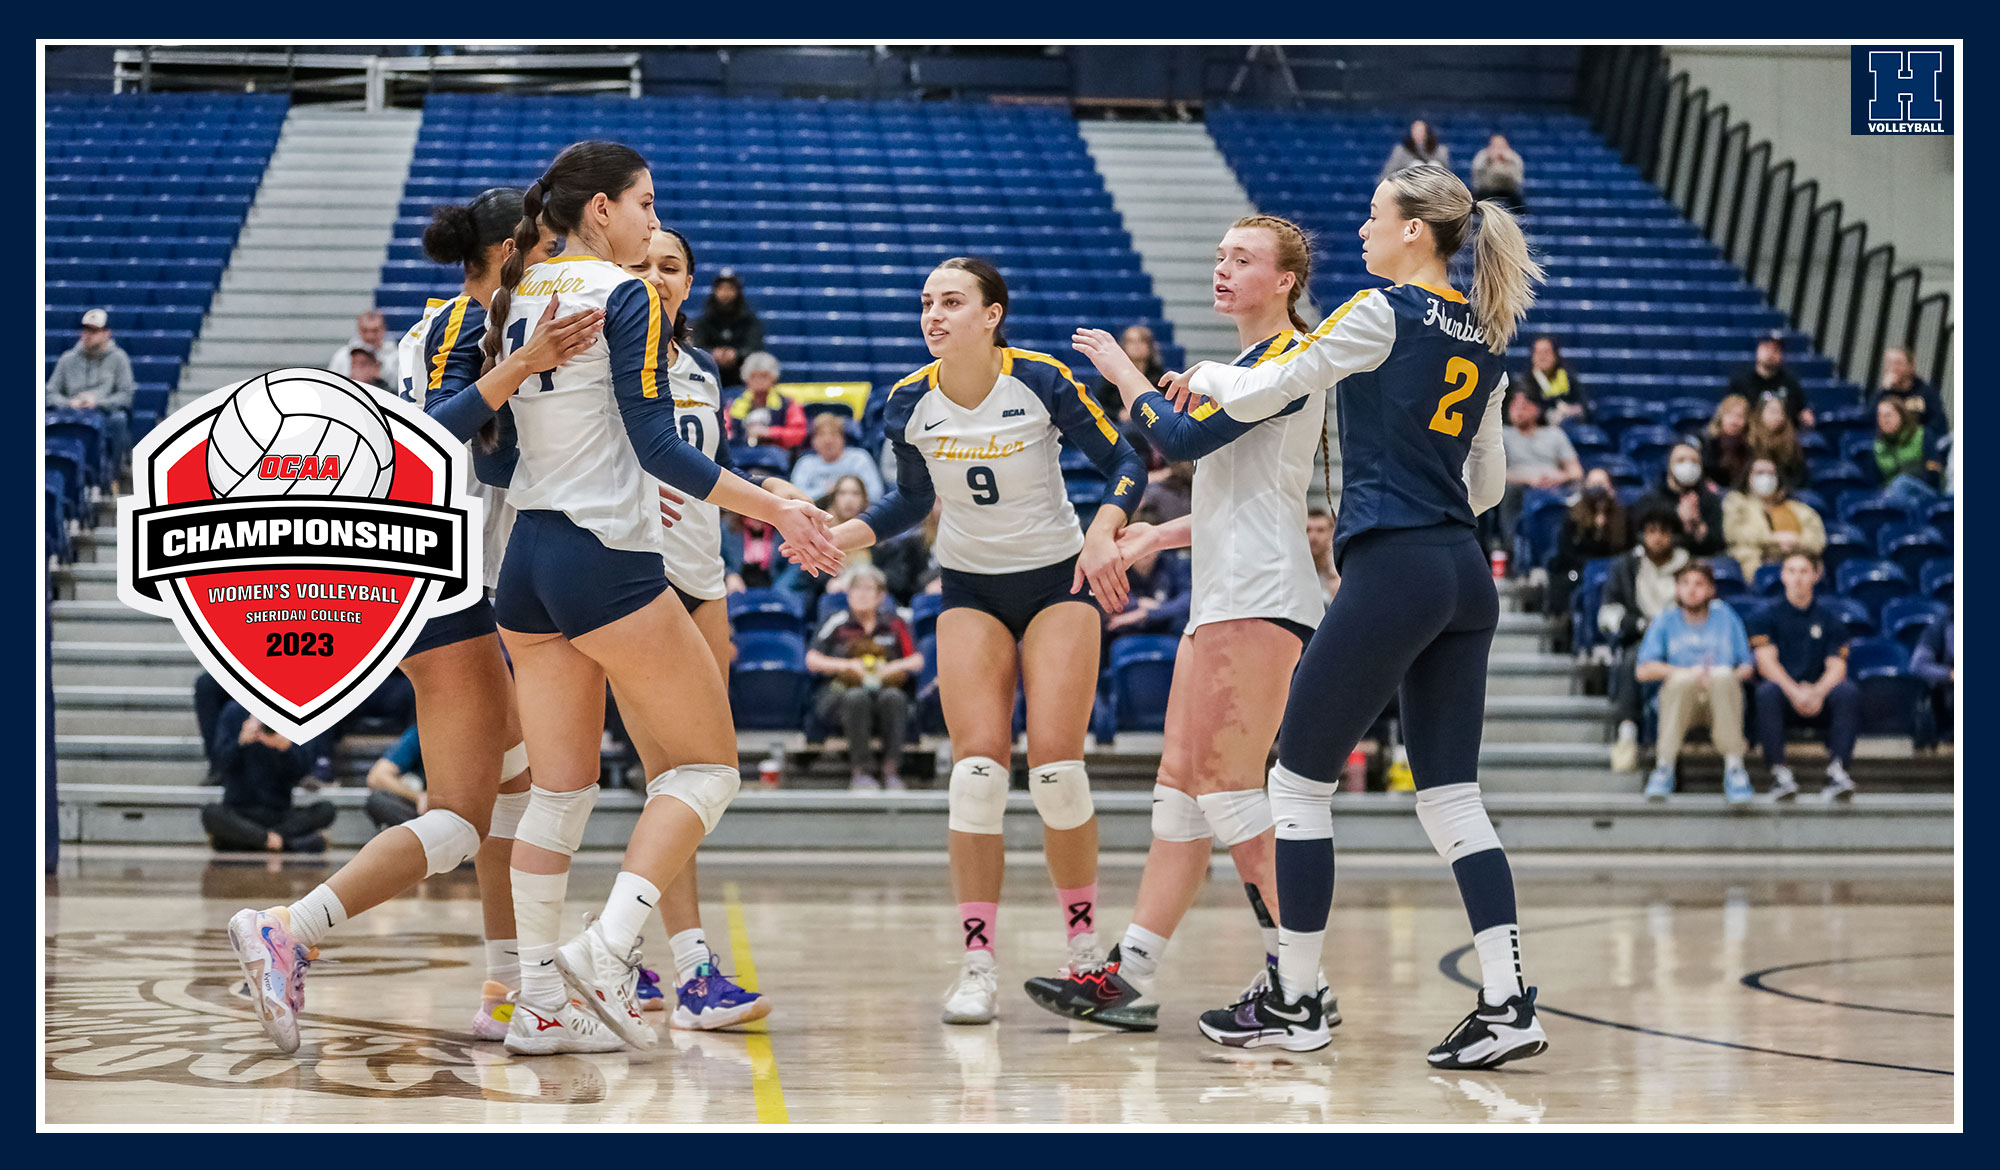 Women's volleyball celebrating a point